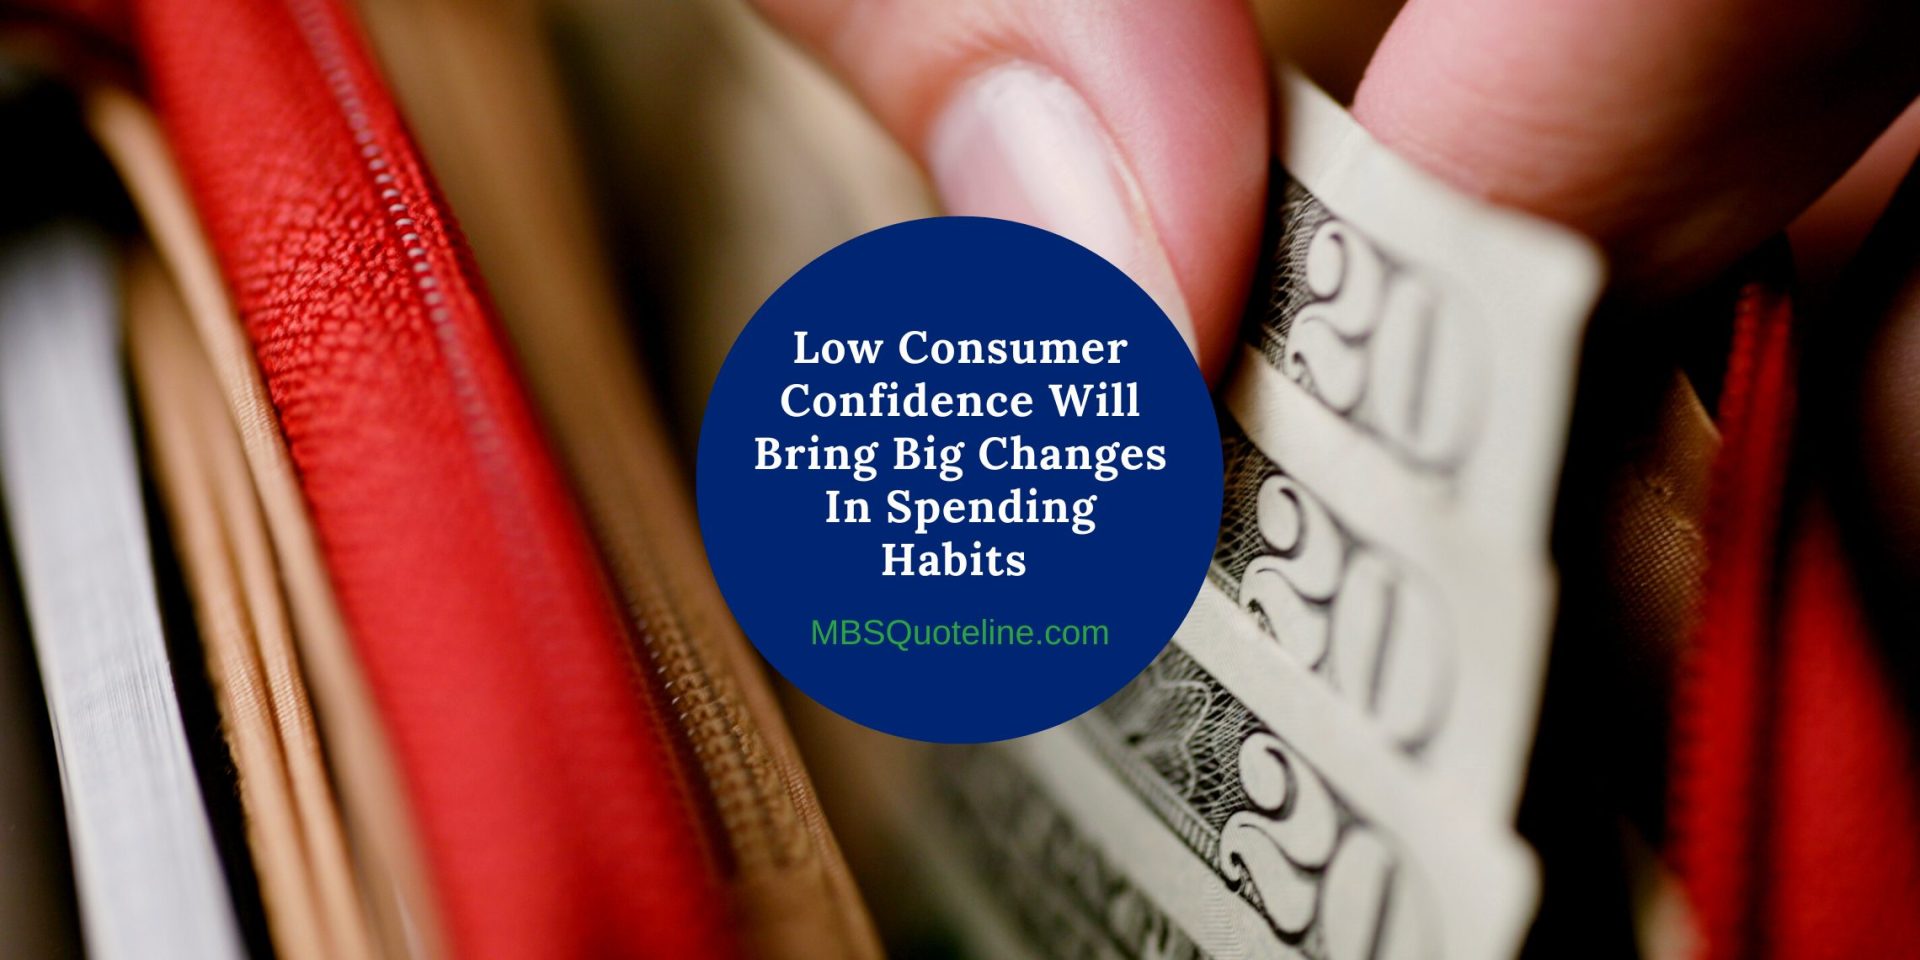 Low Consumer Confidence Will Bring Big Changes In Spending Habits